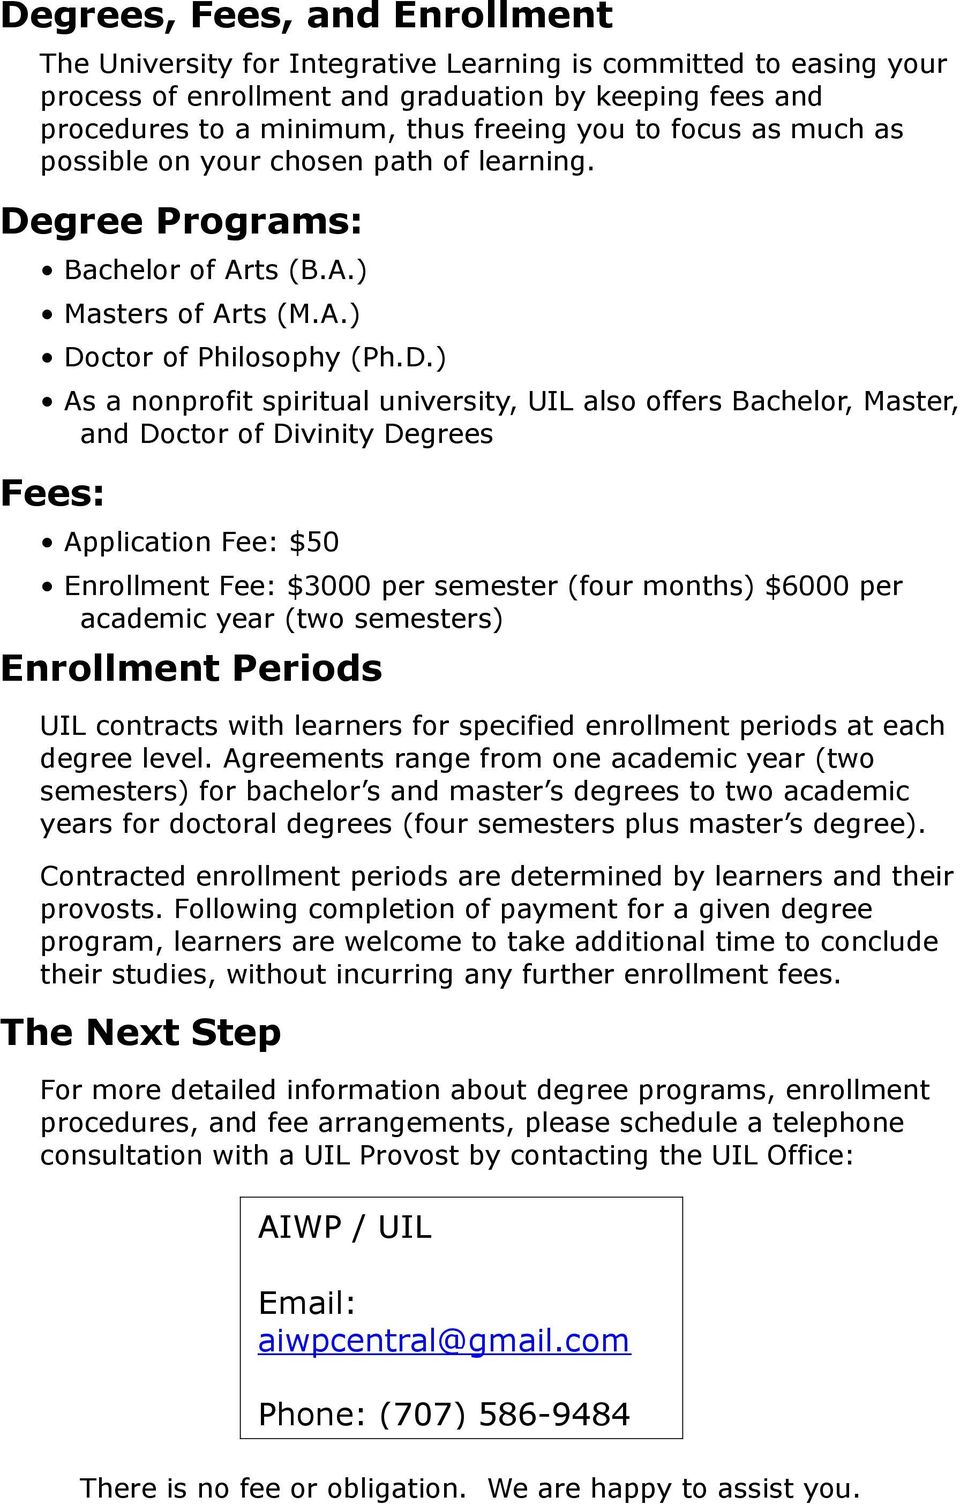 gree Programs: Bachelor of Arts (B.A.) Masters of Arts (M.A.) Do